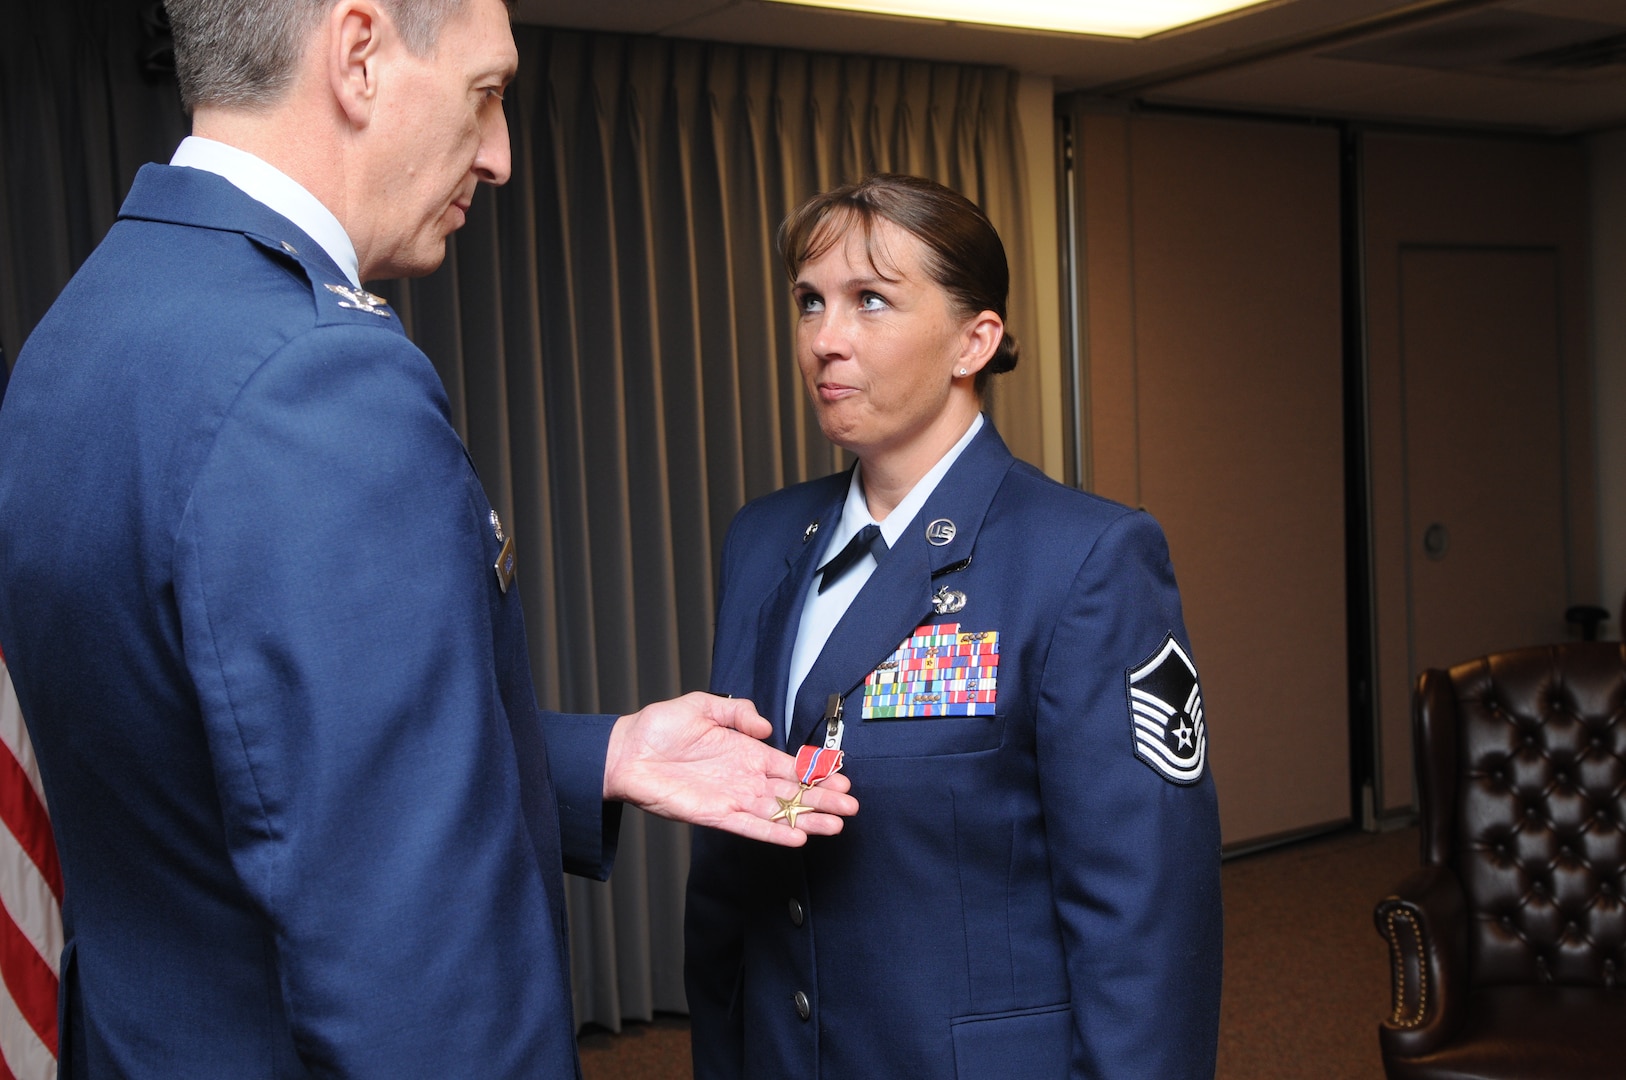 Col. Dan Badger (left), Air Force Manpower Agency commander, pins a Bronze Star on then-Master Sgt. Andrea Vigliotti, AFMA, for meritorious service while serving as deputy of acquisition policy and evaluations at the Joint Contracting Command-Iraq/Afghanistan in Baghdad. Sergeant Vigliotti was also honored that day when she was promoted to the top two percent of the Air Force by earning her senior master sergeant stripe. (U.S. Air Force photo by Rich McFadden)